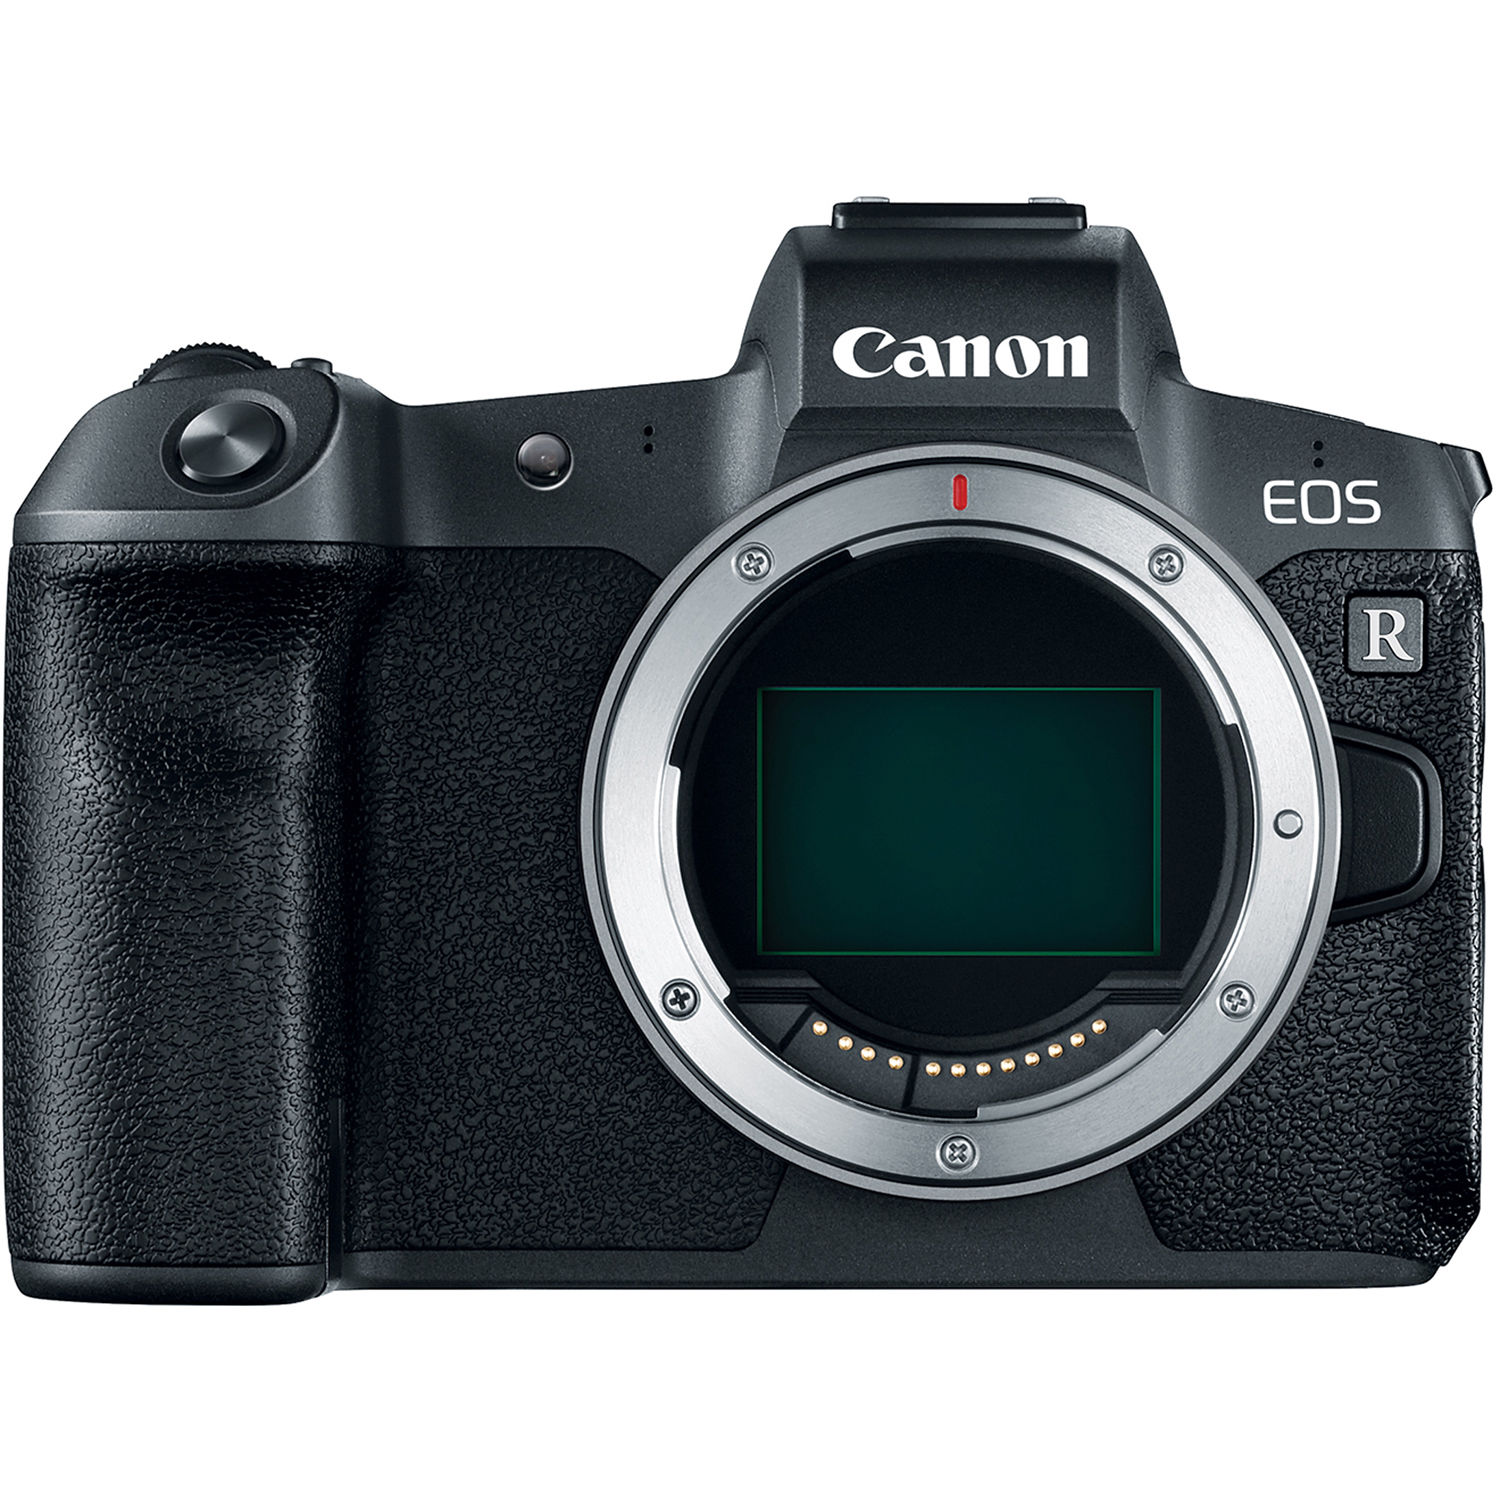 Canon's first full-frame mirrorless